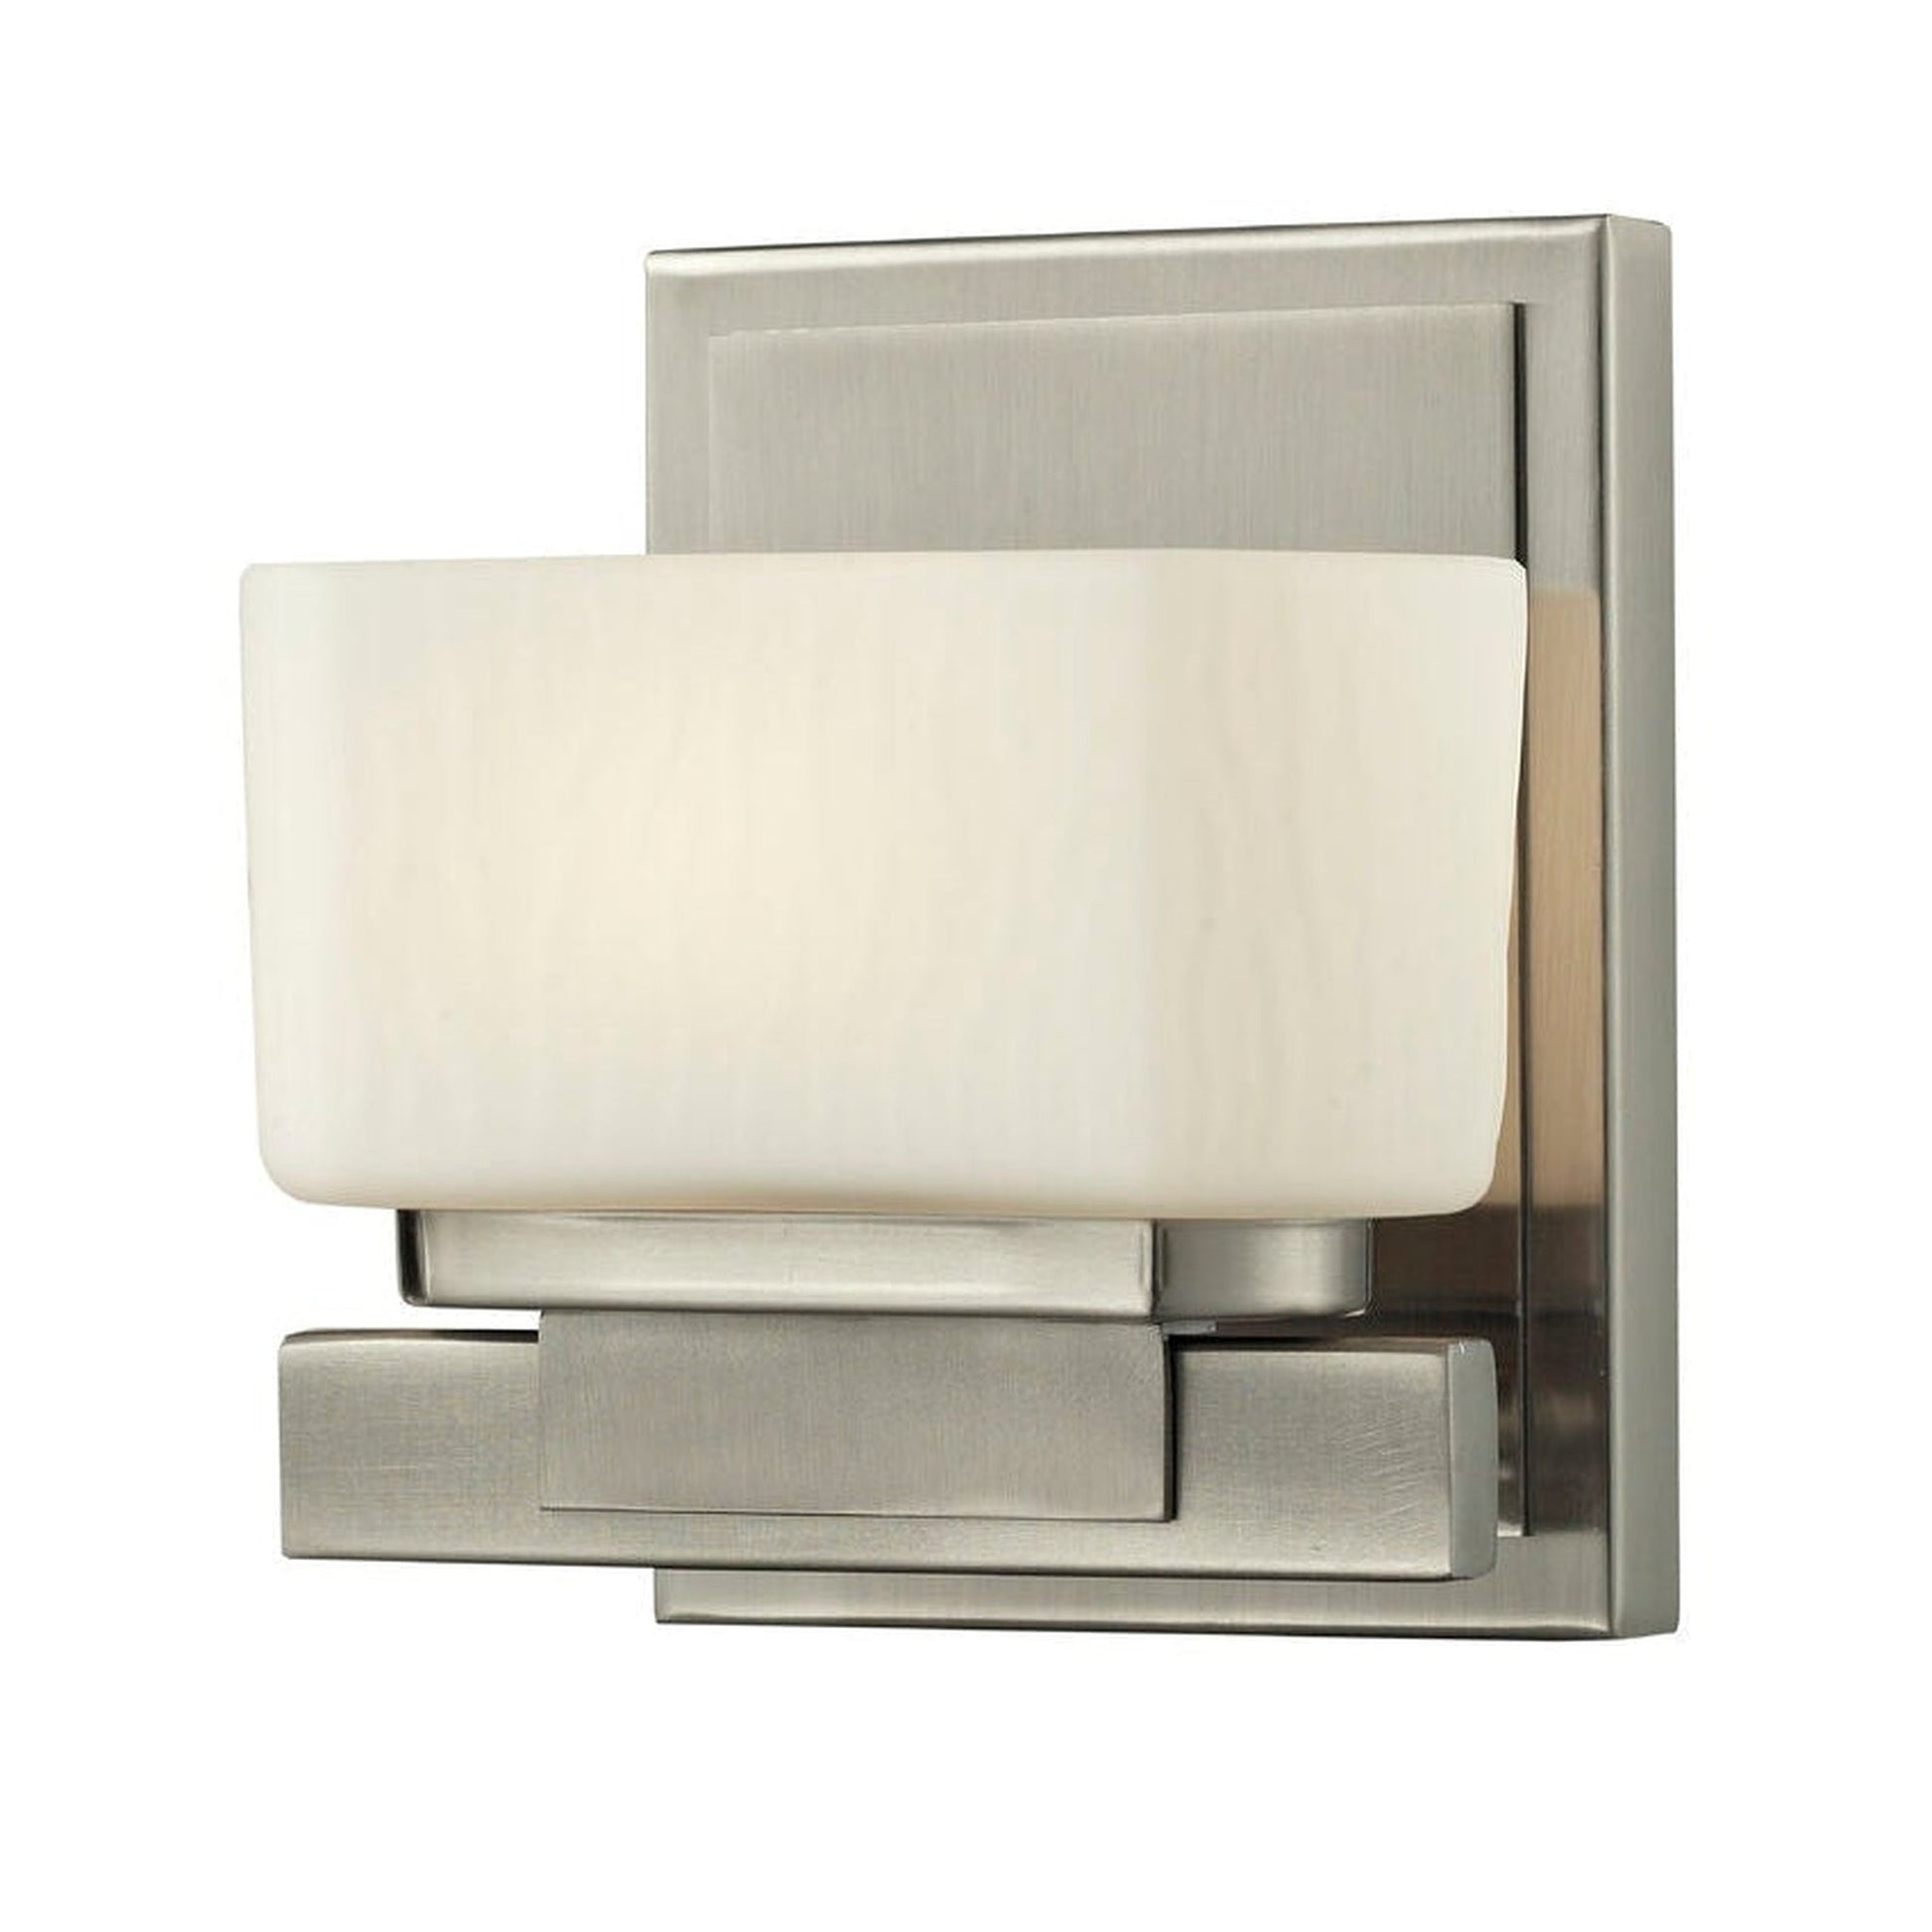 Z-Lite Gaia 6" 1-Light LED Brushed Nickel Vanity Light With Matte Opal Glass Shade